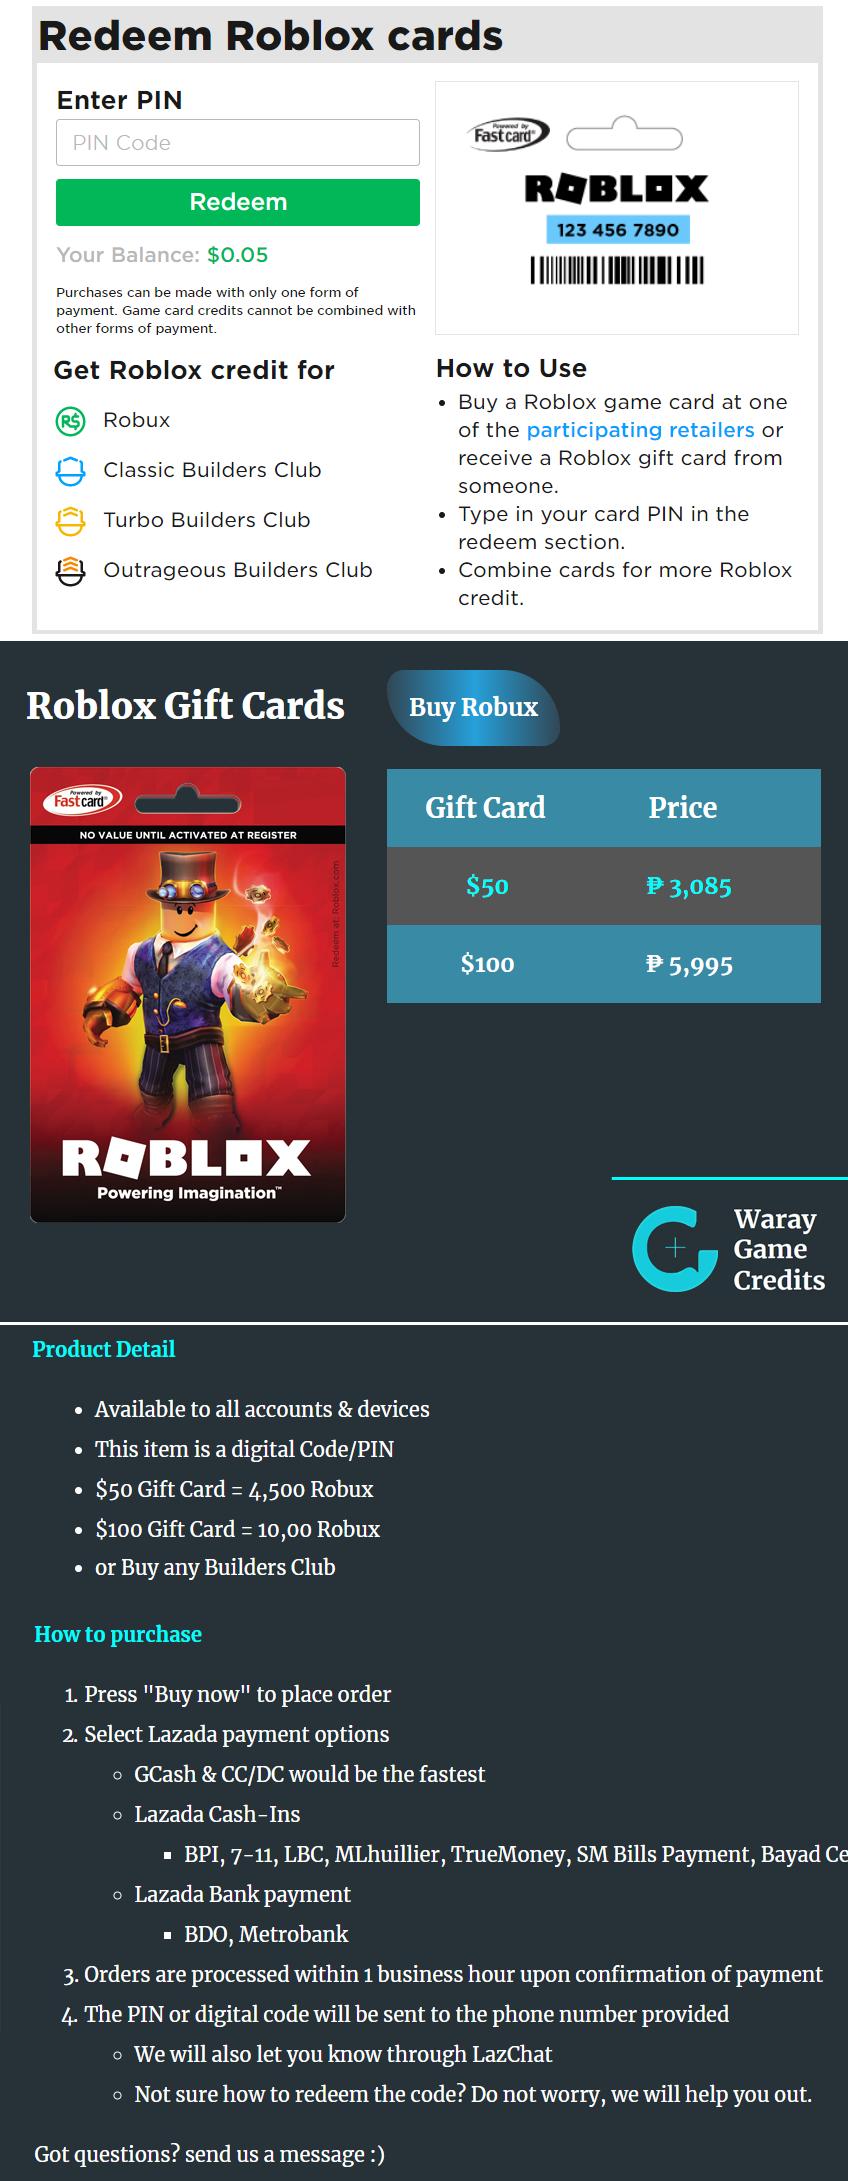 50 100 Roblox Gift Card - 